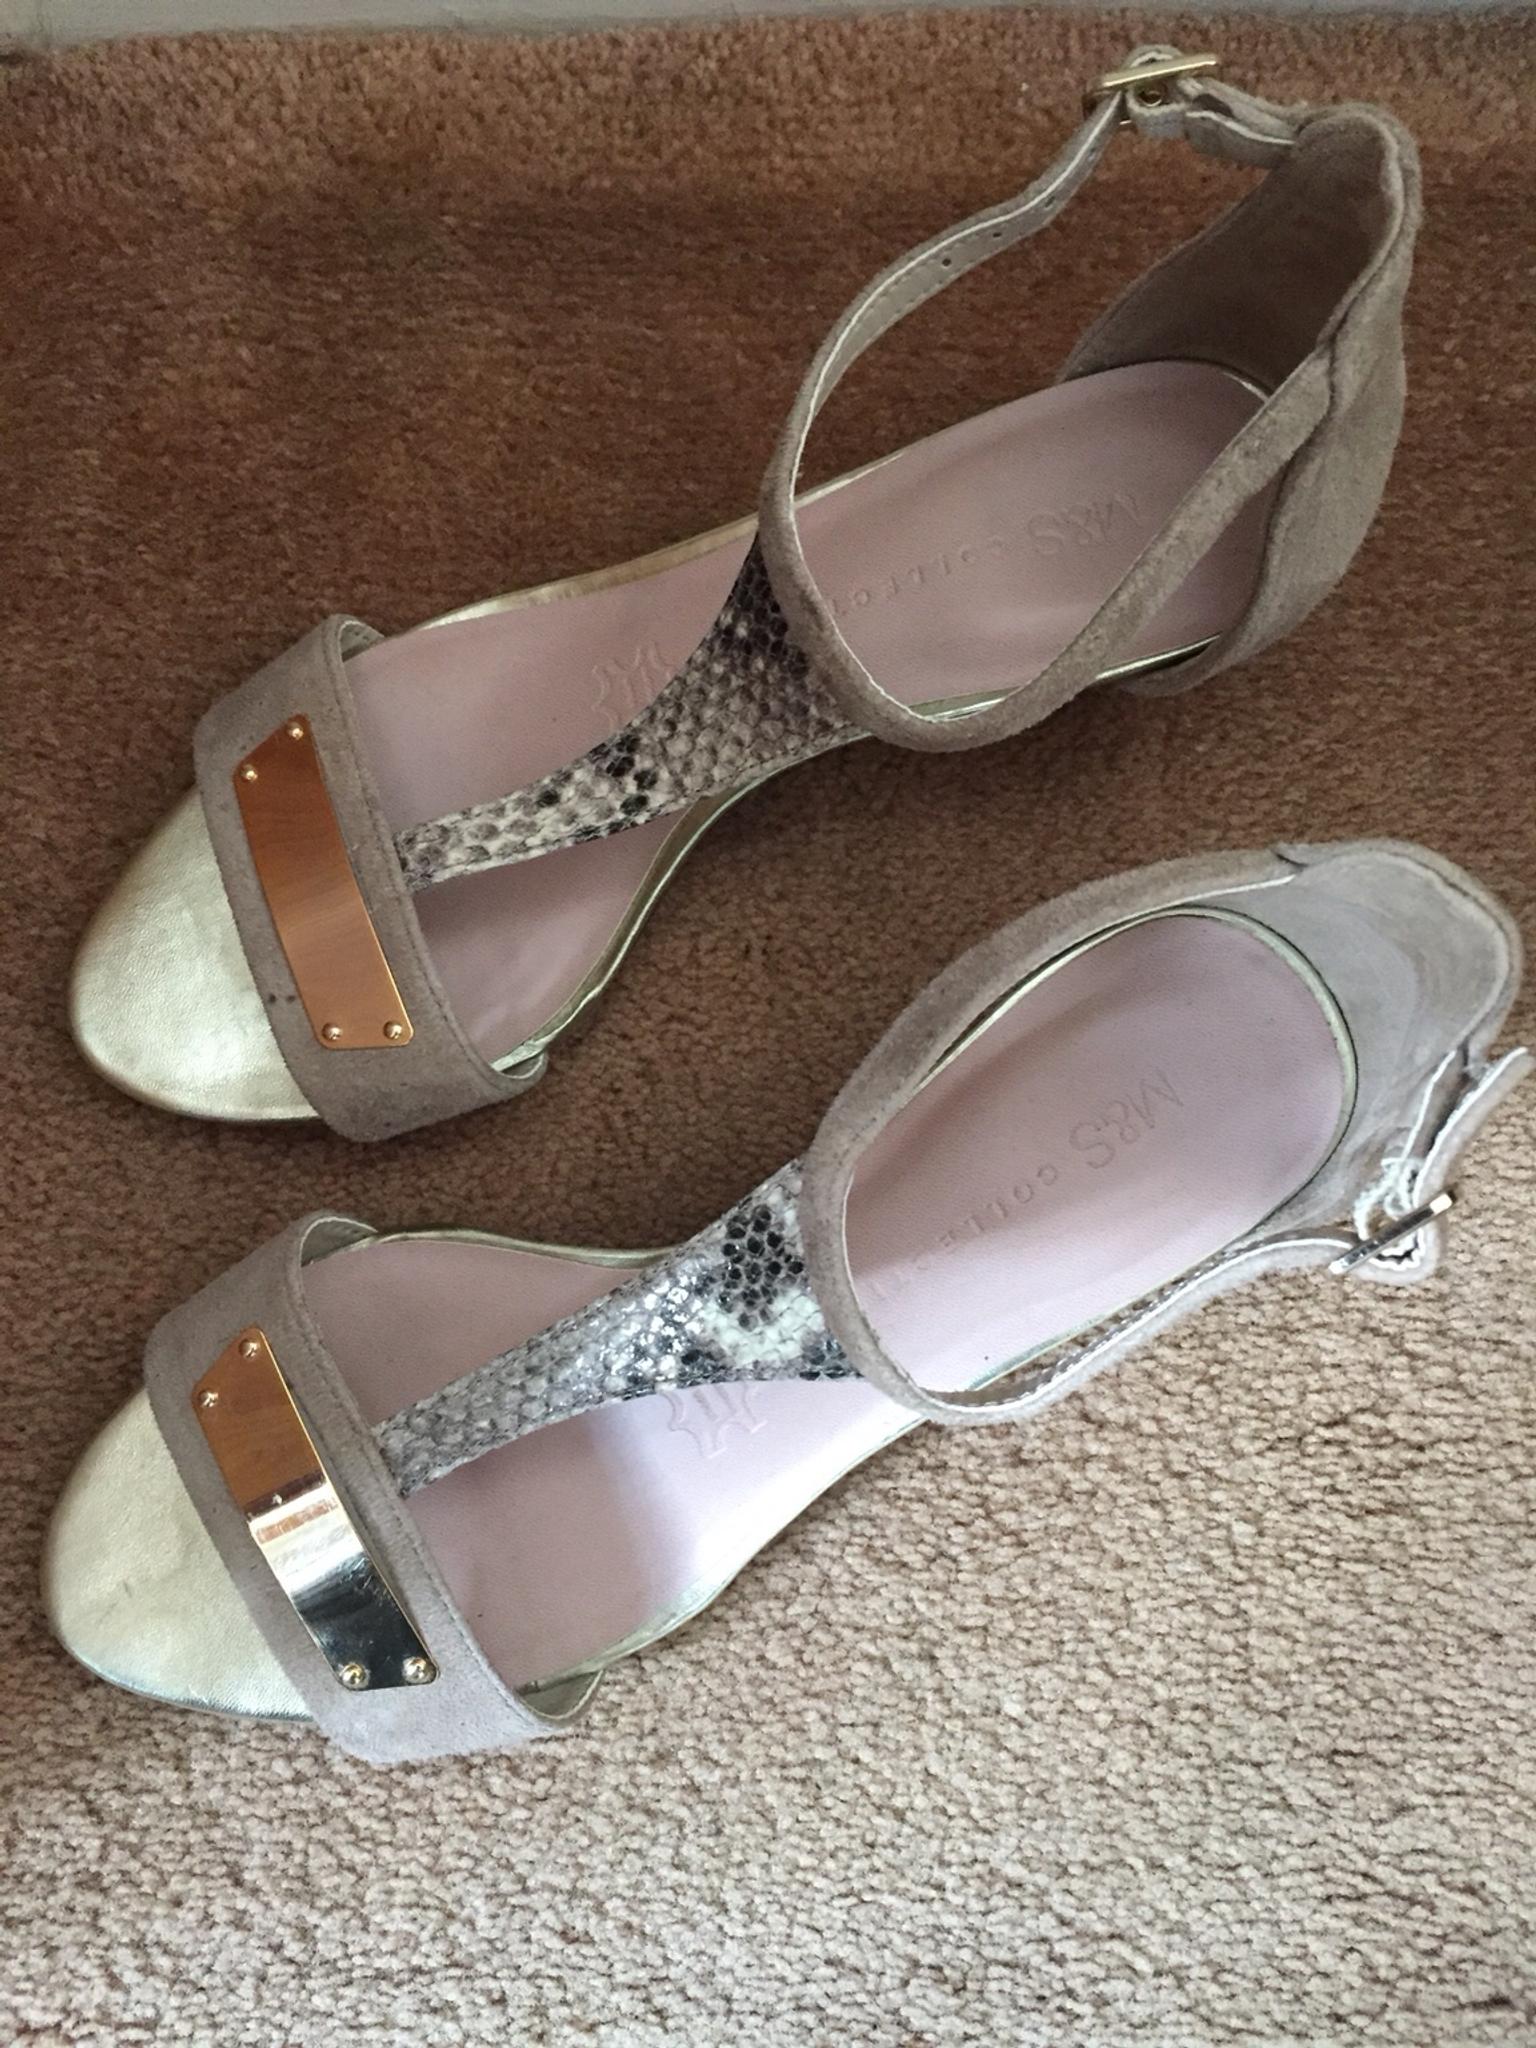 m and s gold sandals shop 03a69 79fe3